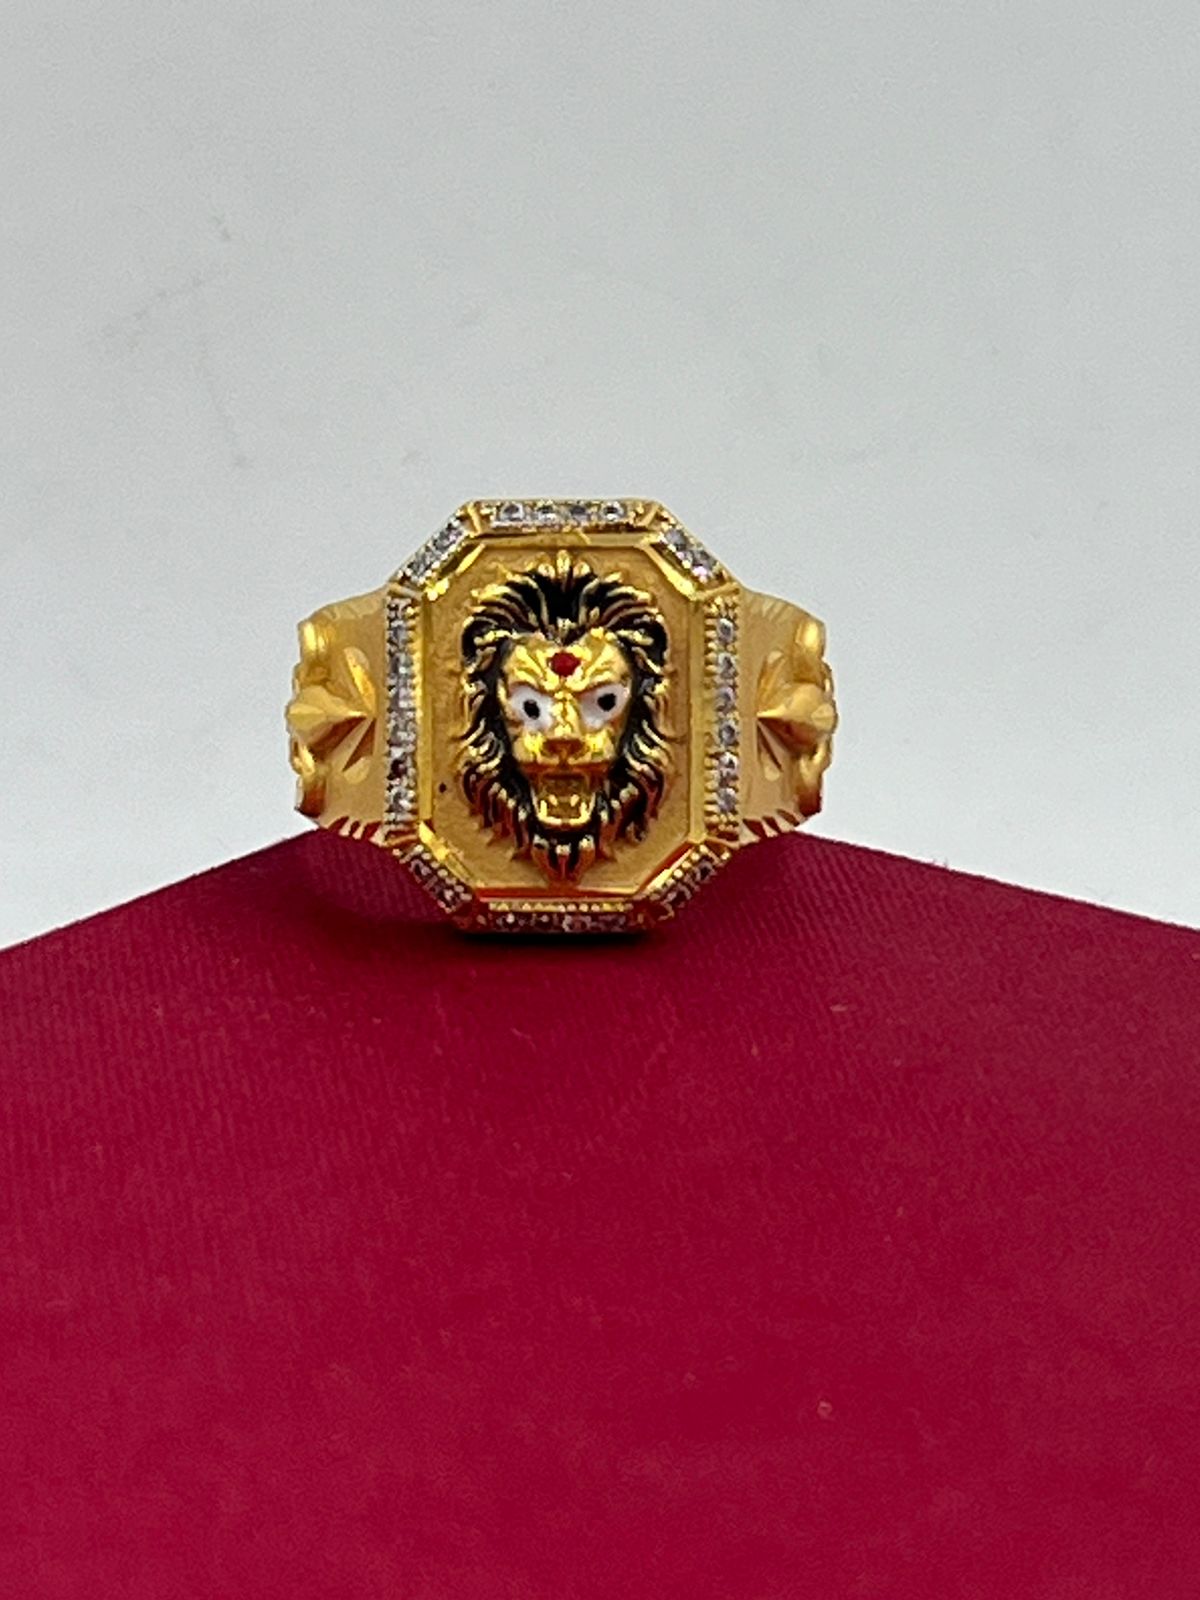 Buy Lion Head Ring, 18k Gold Plated Ring, Lion Ring, Statement Ring, Dainty  Ring, Men's Lion Ring, Mens Gold Signet Ring, Mens Ring, Online in India -  Etsy